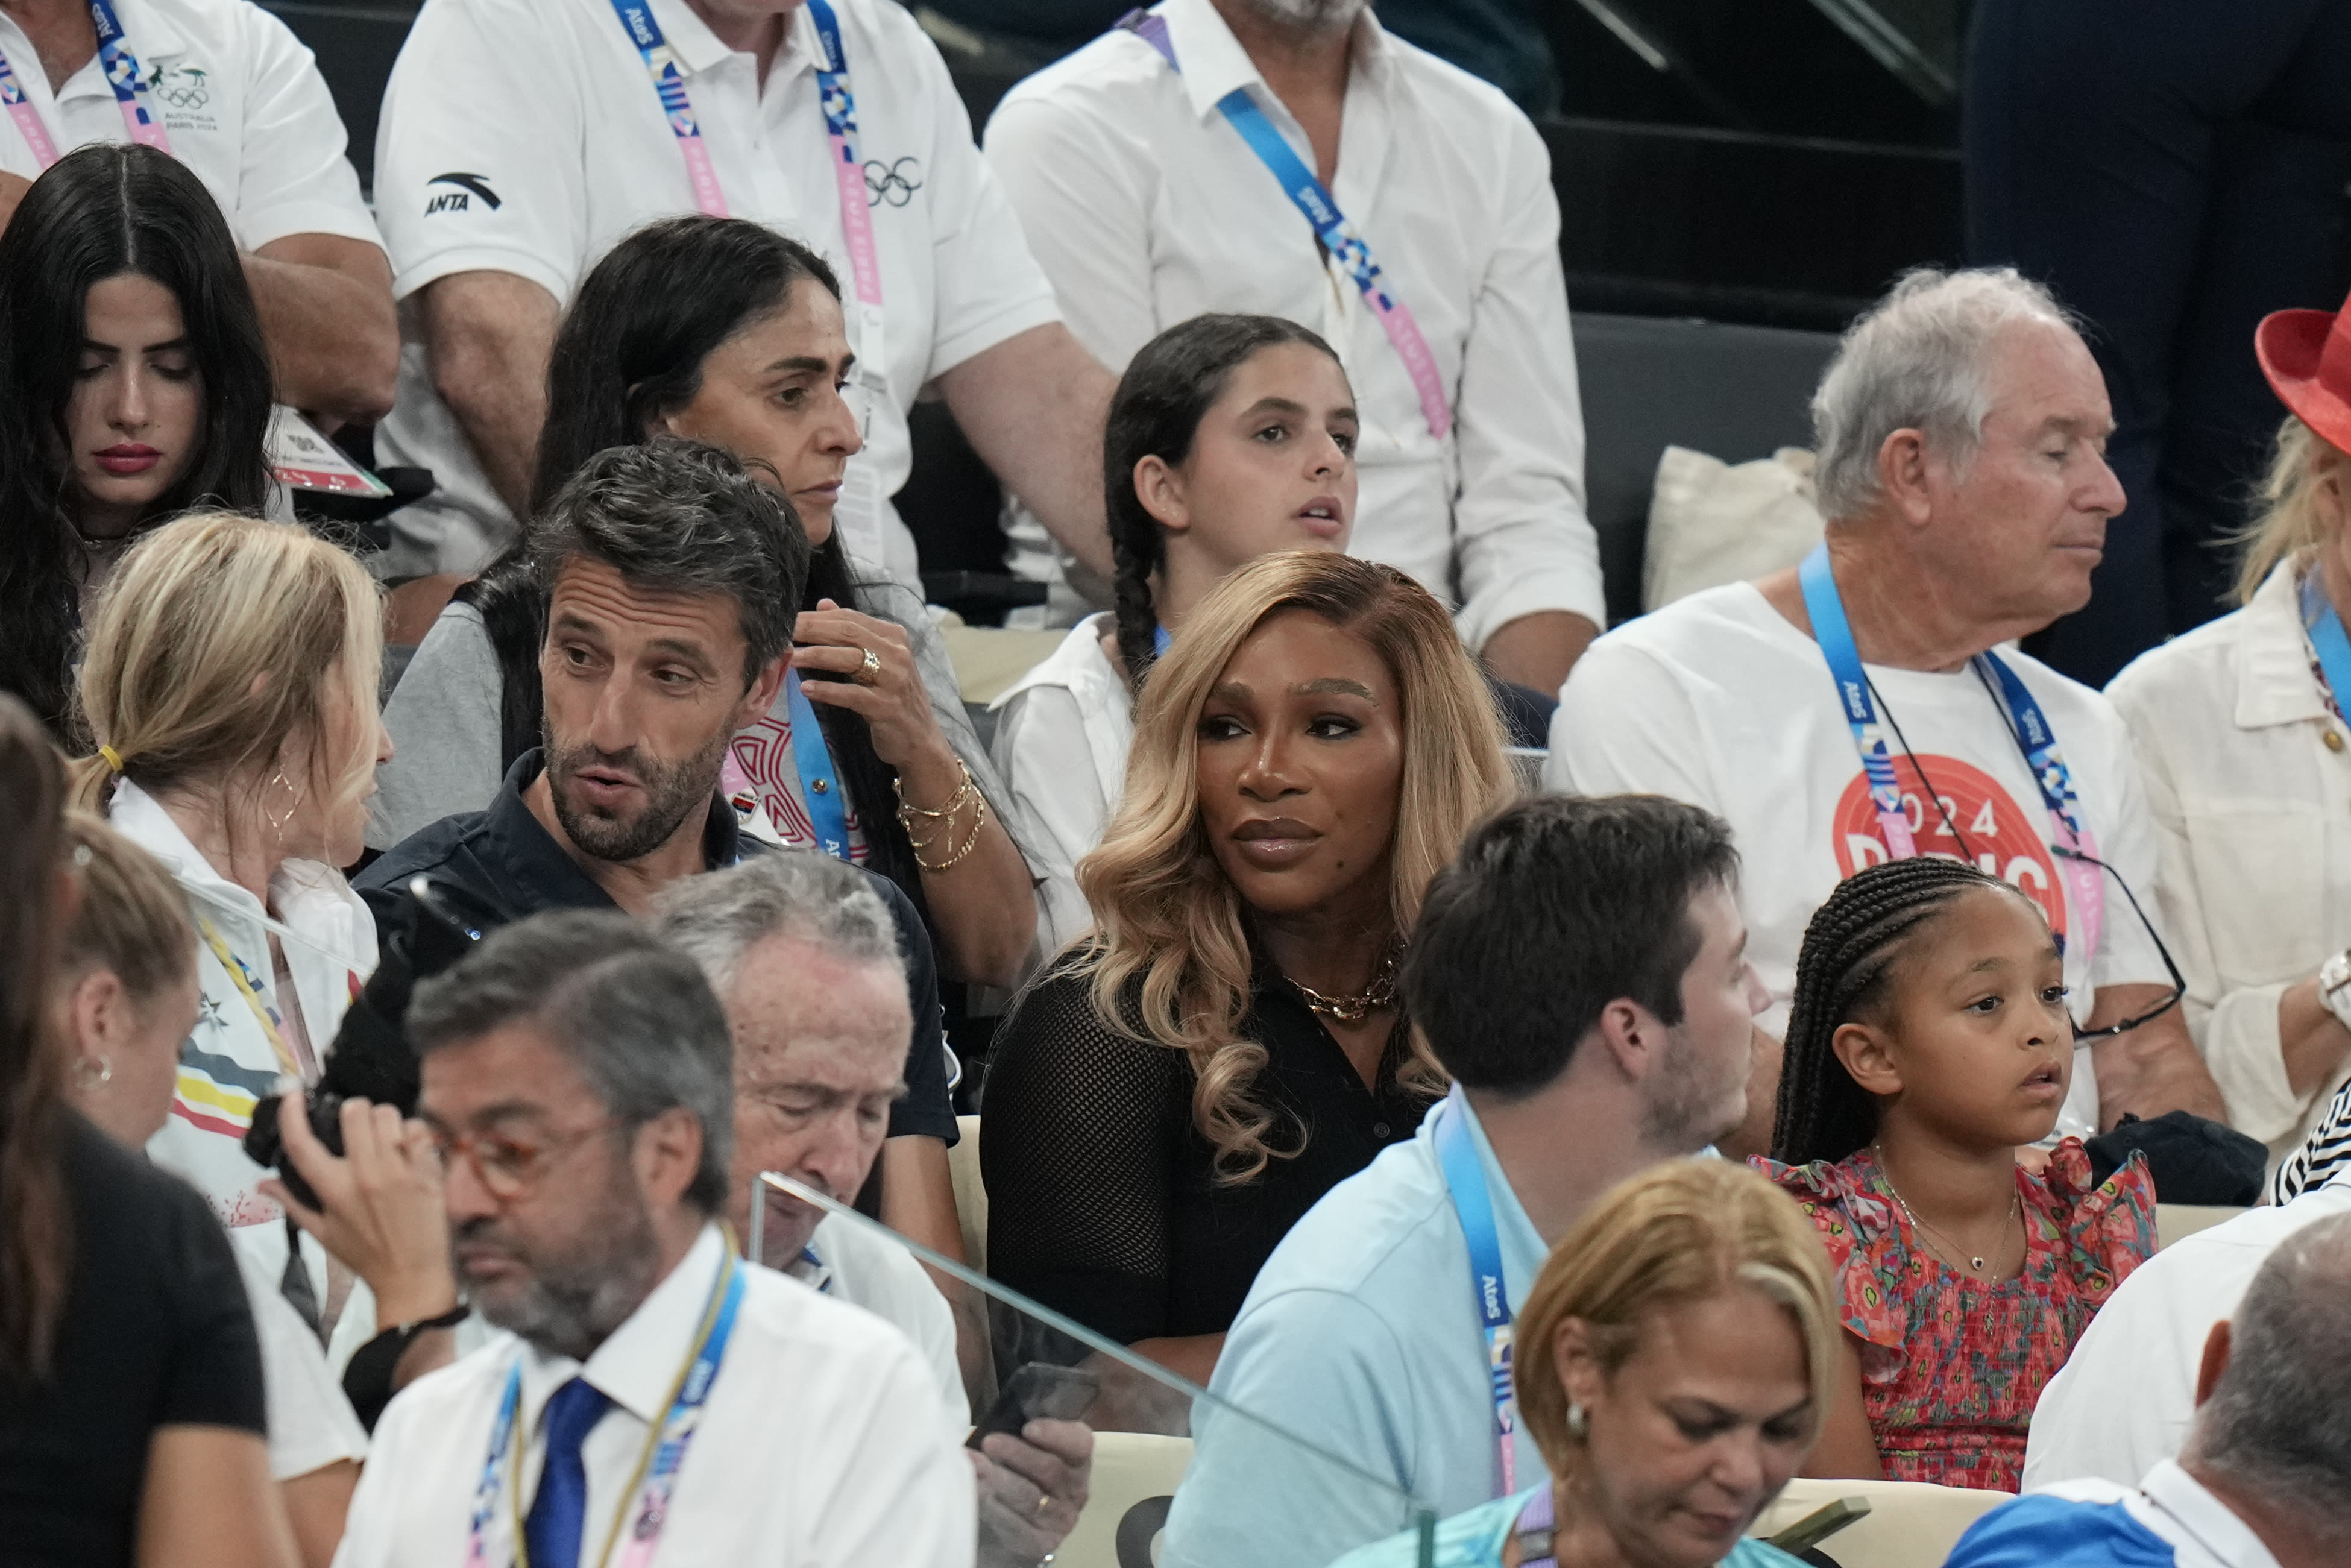 Serena Williams, Nicole Kidman and other A-list celebrities watch Biles win another Olympic gold